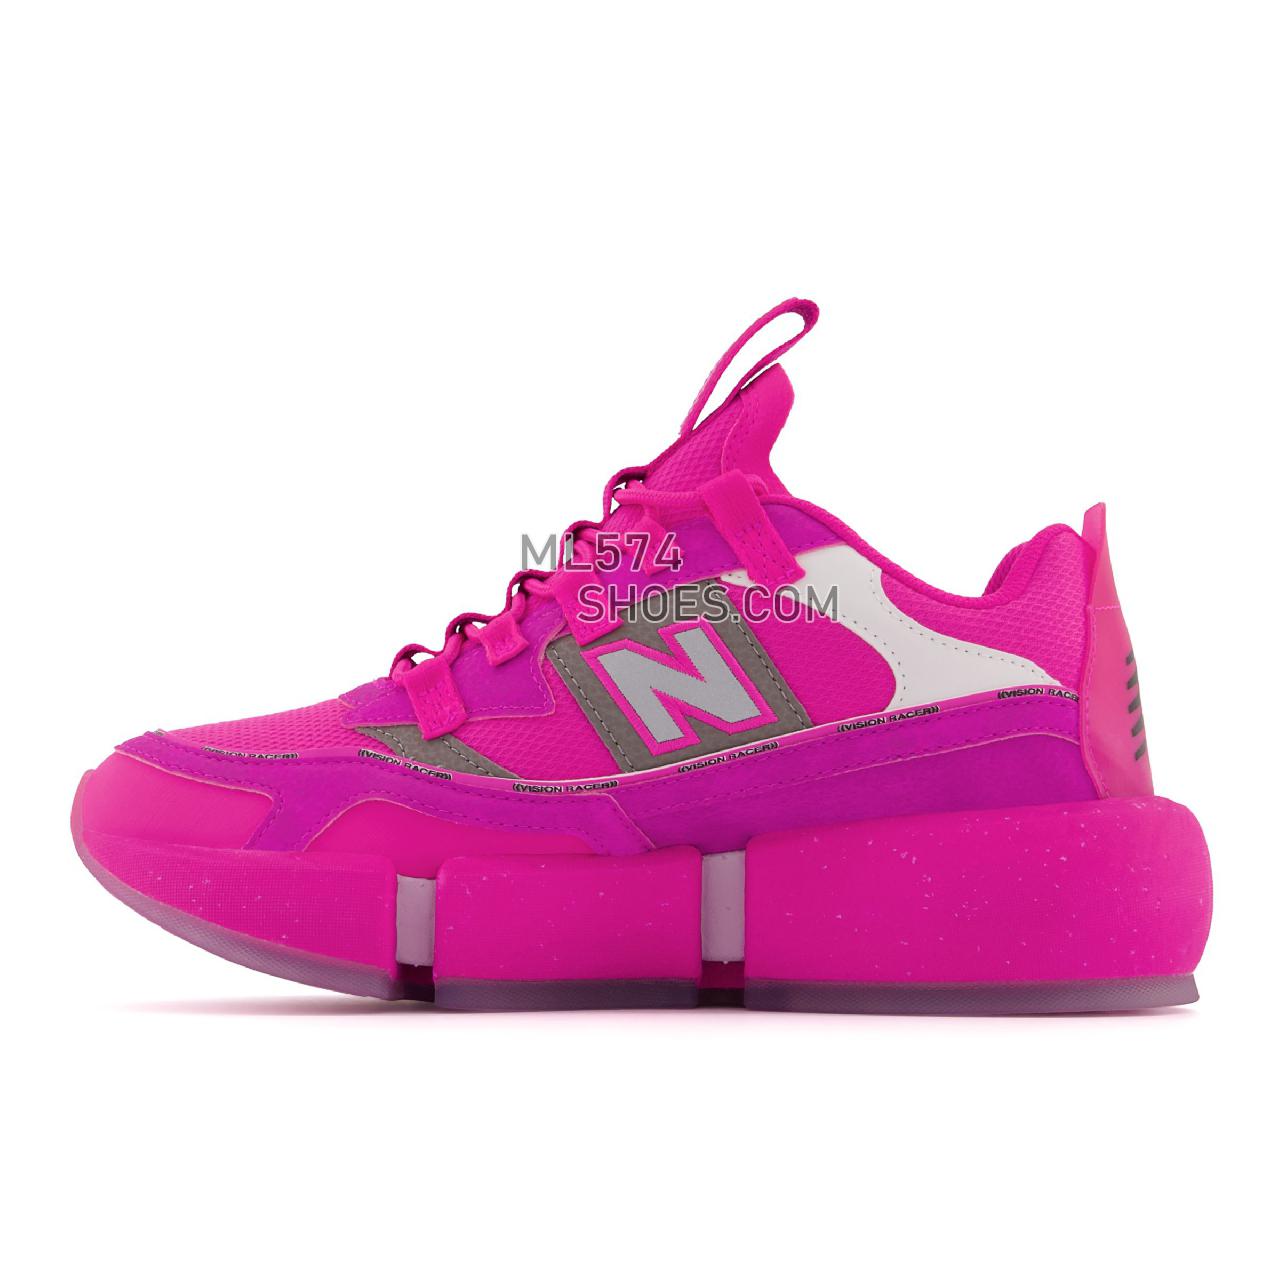 New Balance Vision Racer - Unisex Men's Women's Sport Style Sneakers - Peony with Black - MSVRCJSC